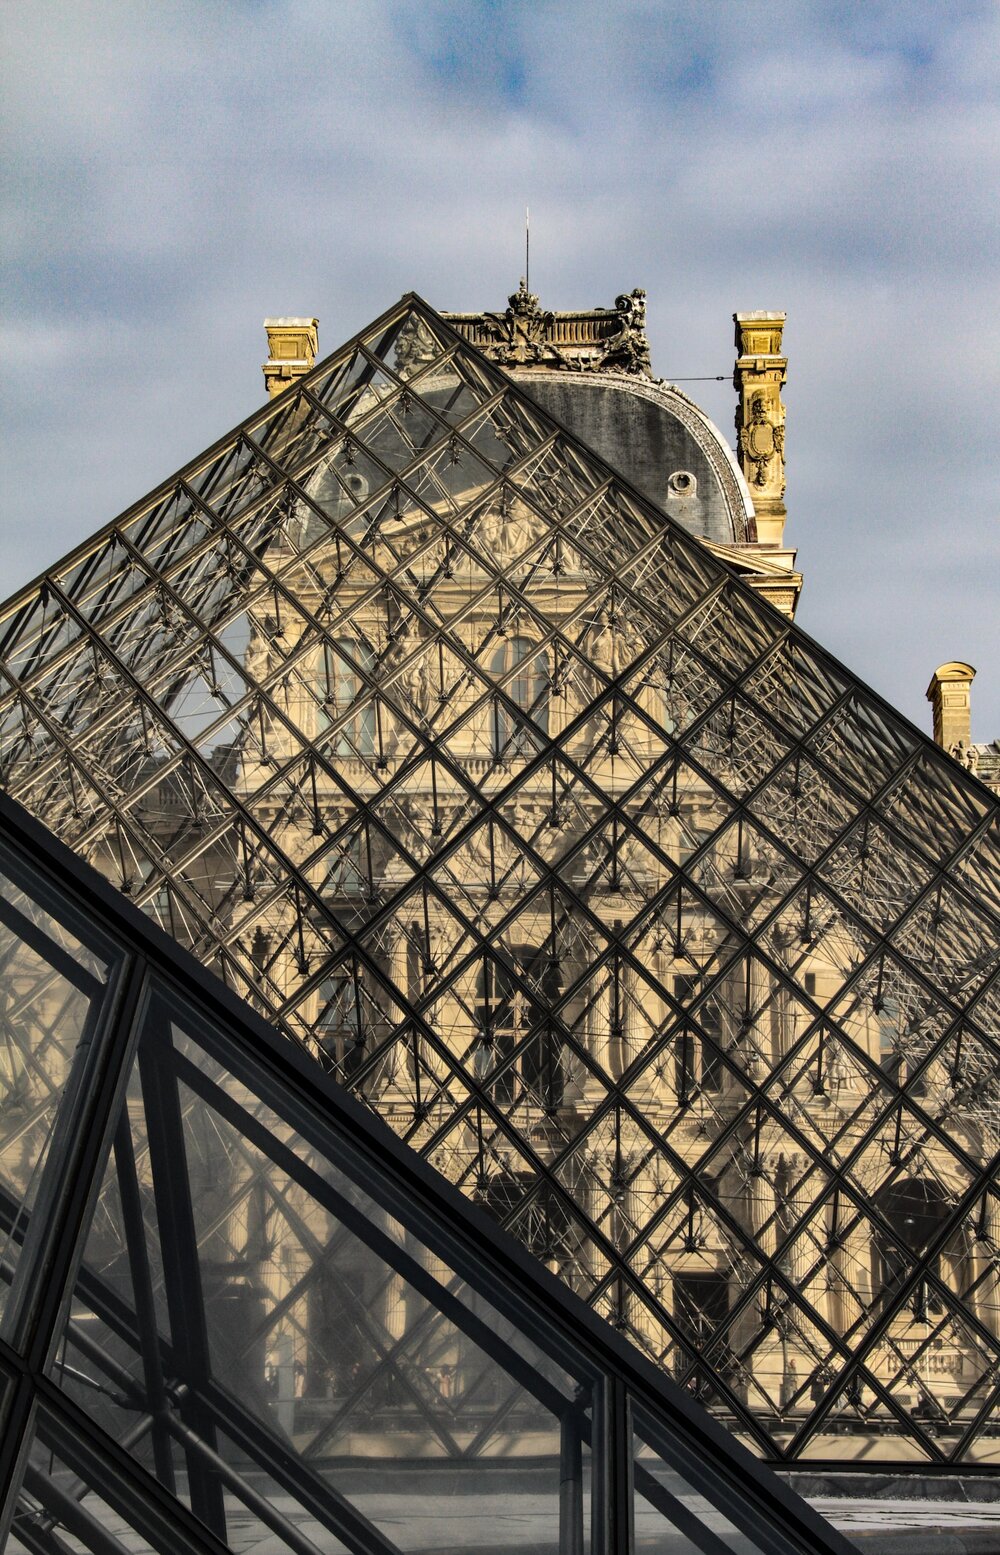 Visiting the Louvre Museum